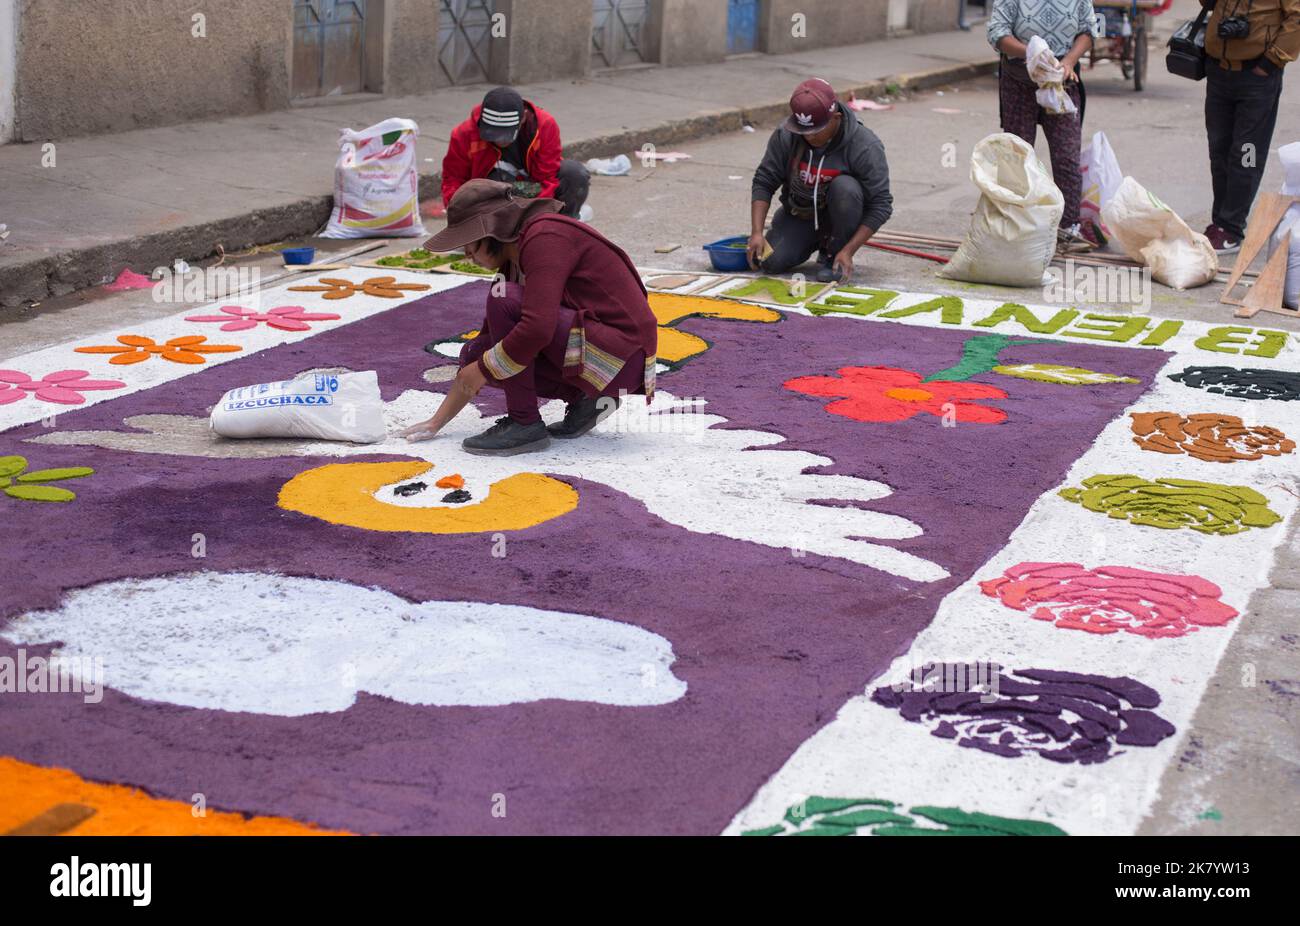 People assembling carpets for the procession of the 'Señor de los Milagros'. Concept of religious traditions in Peru. Stock Photo